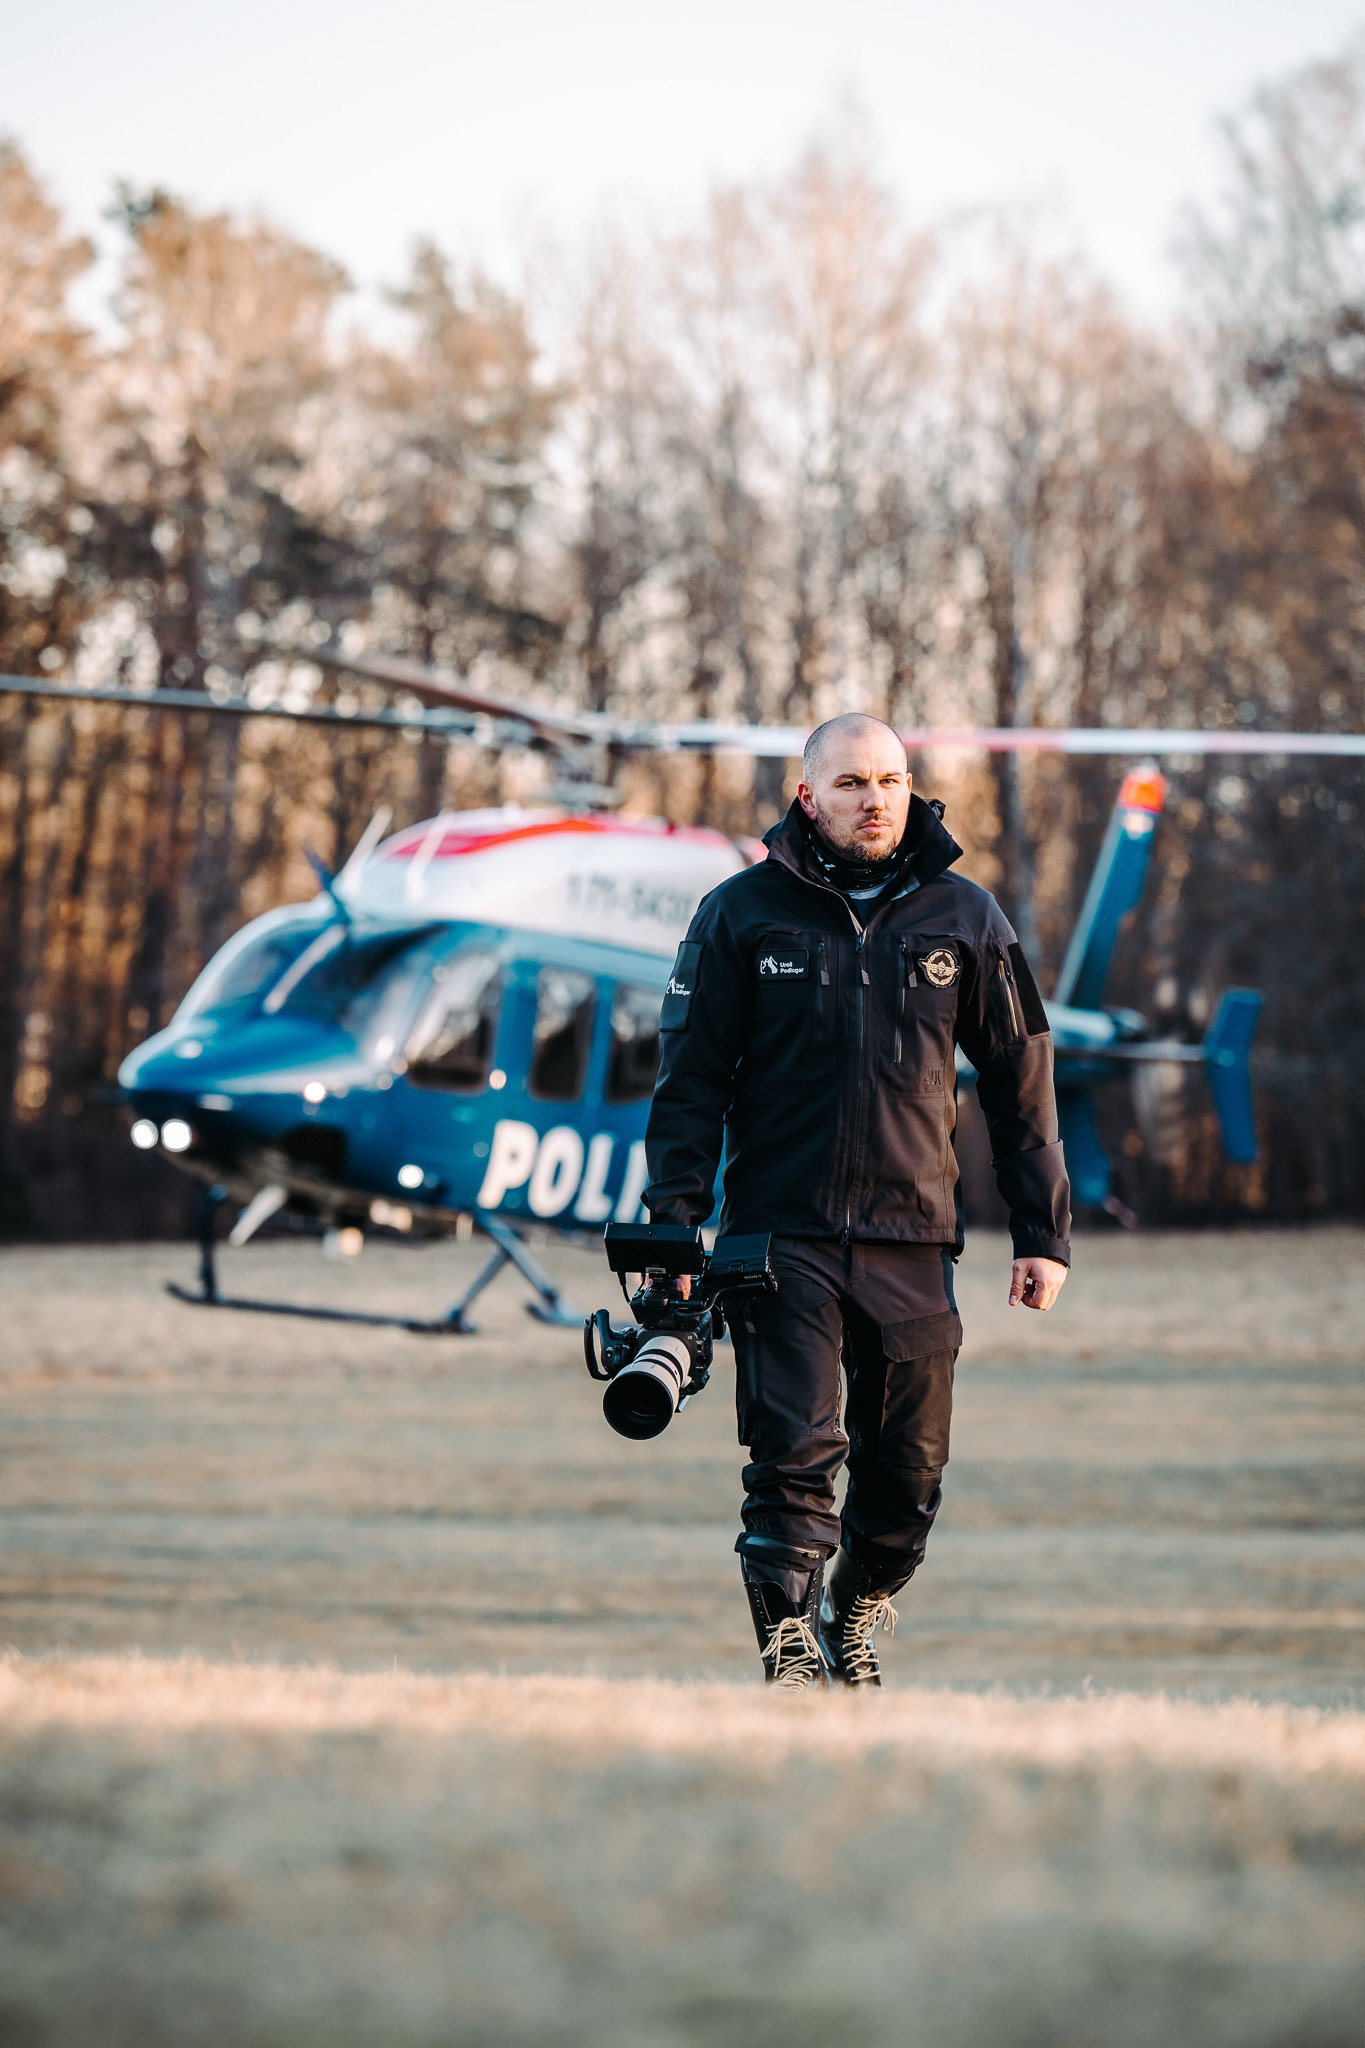 Shooting from helicopters, with the SmallHD Ultra 5 monitor